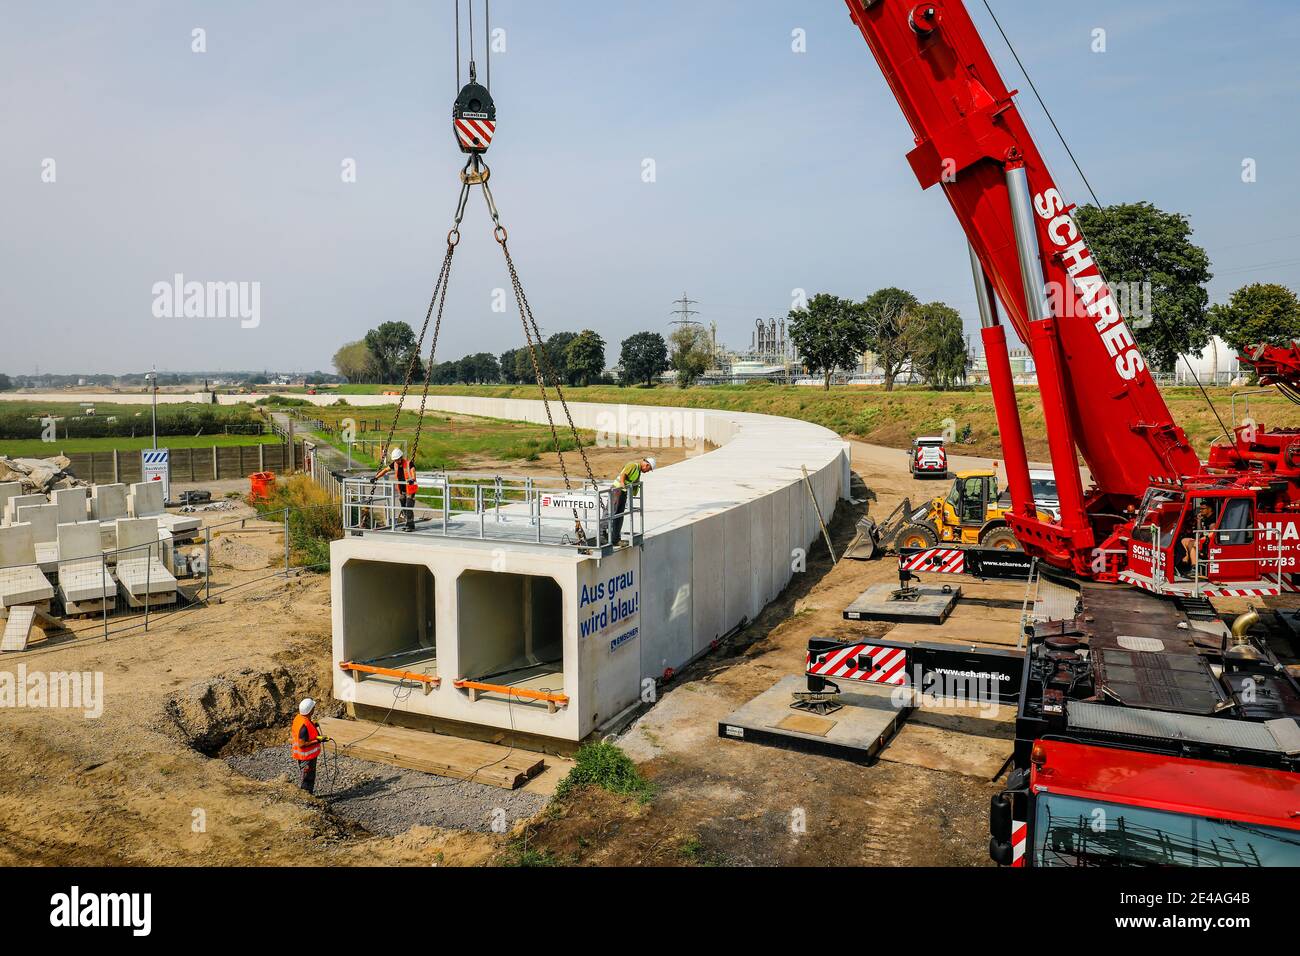 Oberhausen, Ruhr area, North Rhine-Westphalia, Germany - Emscher conversion, new construction of the Emscher AKE sewer, here in the Holtener Feld prefabricated frame double sewer parts (box profiles) are being laid, here the last prefabricated sewer at the Oberhausen pumping station, on the right the Emscher waste water river, the ecological one, The conversion of the Emscher system consists of the construction of a central sewage treatment system in the Ruhr area, the construction of sewers and the renaturation of the Emscher and its tributaries. Stock Photo